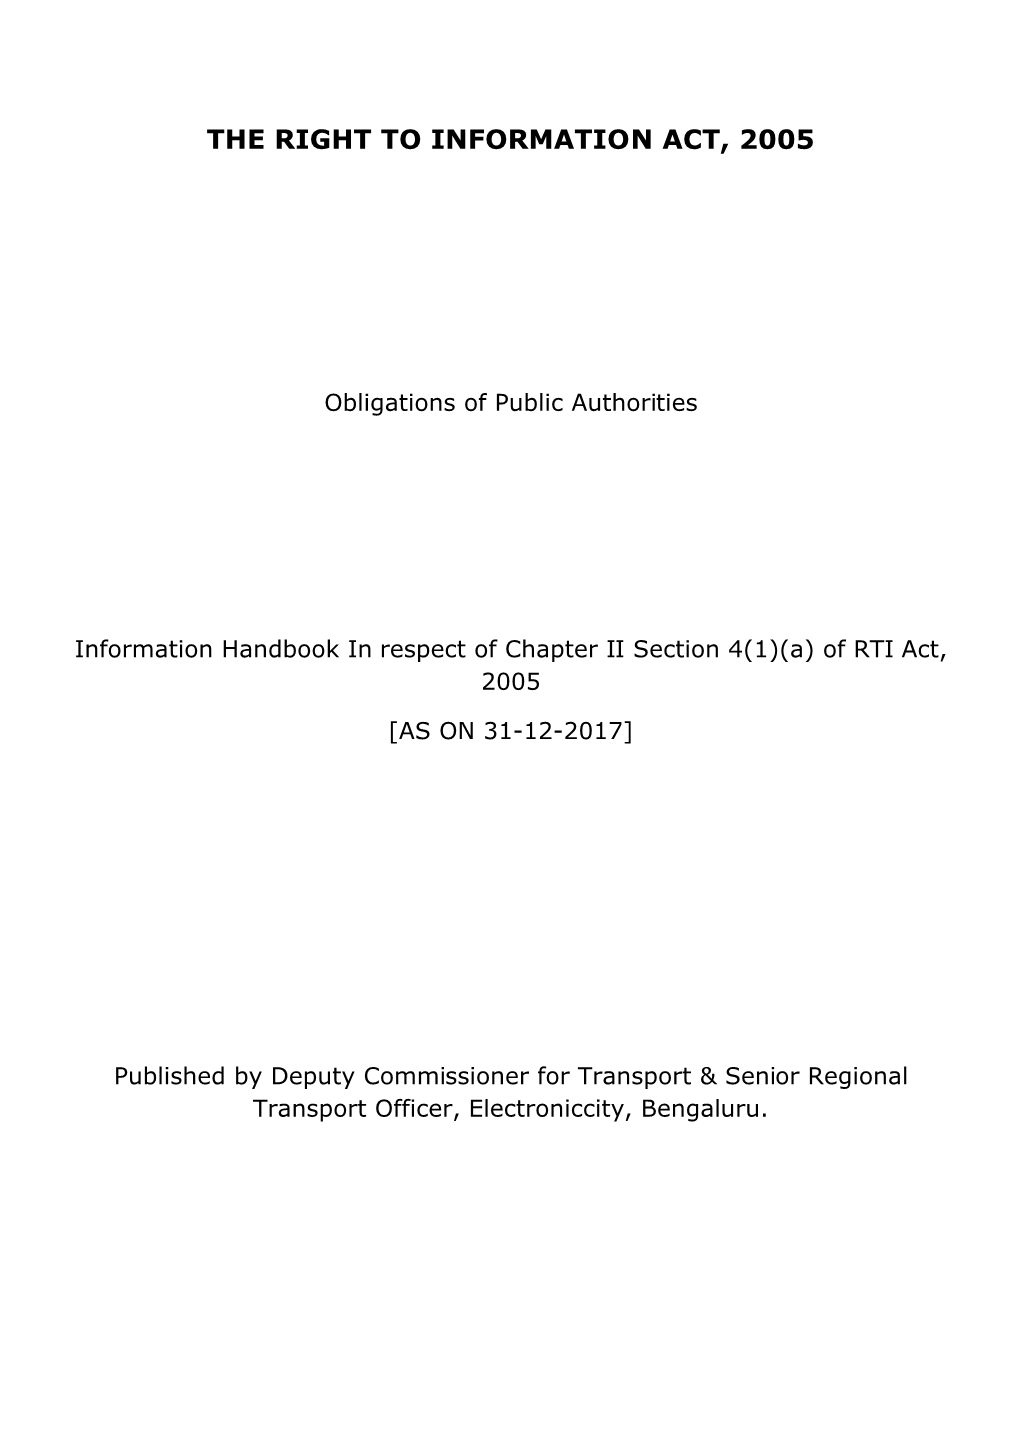 The Right to Information Act, 2005